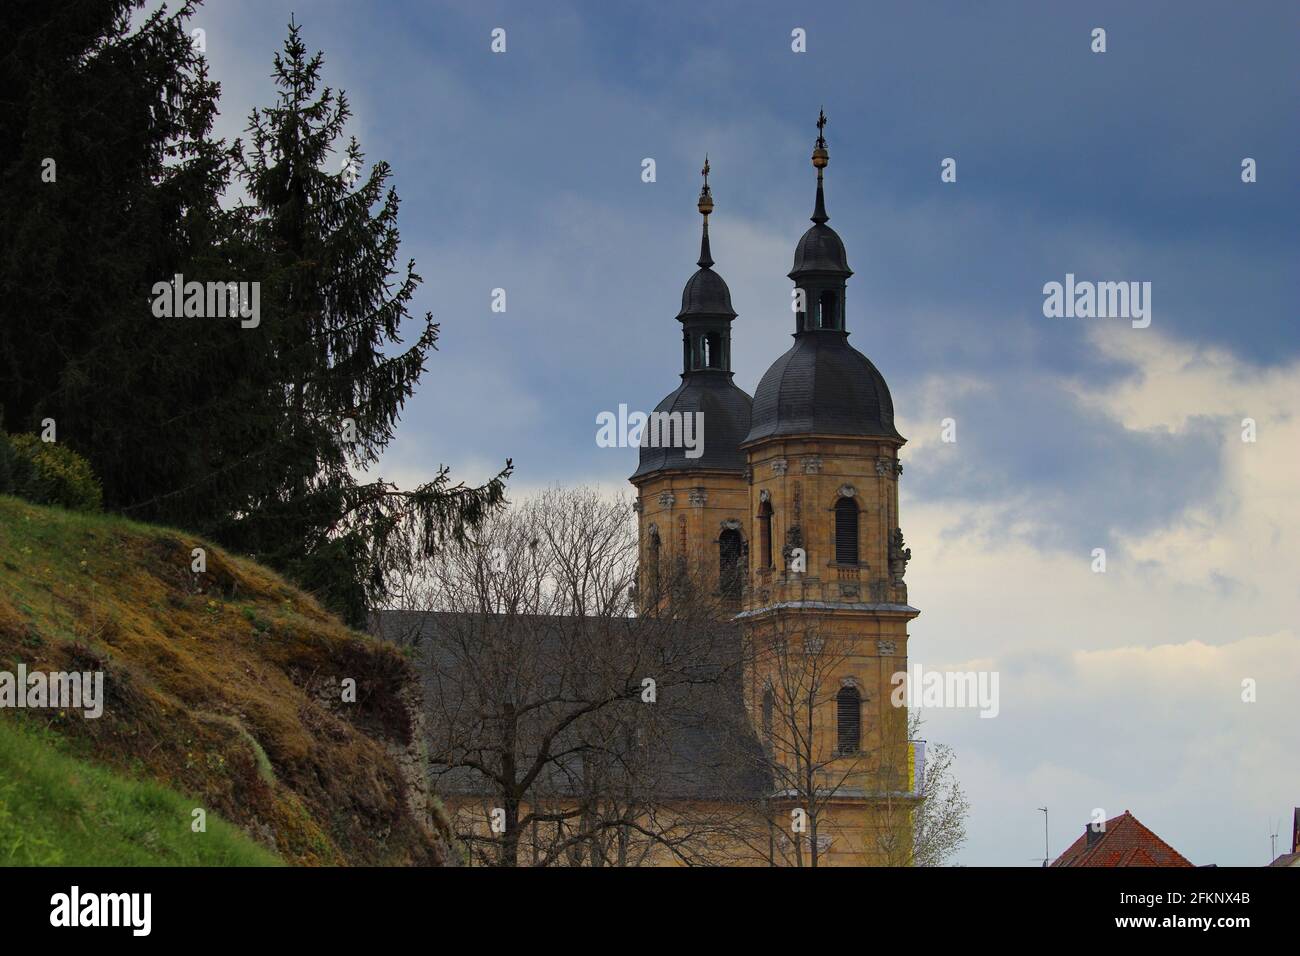 view of a basilica agaimnst overcast sky in upper franconia Stock Photo